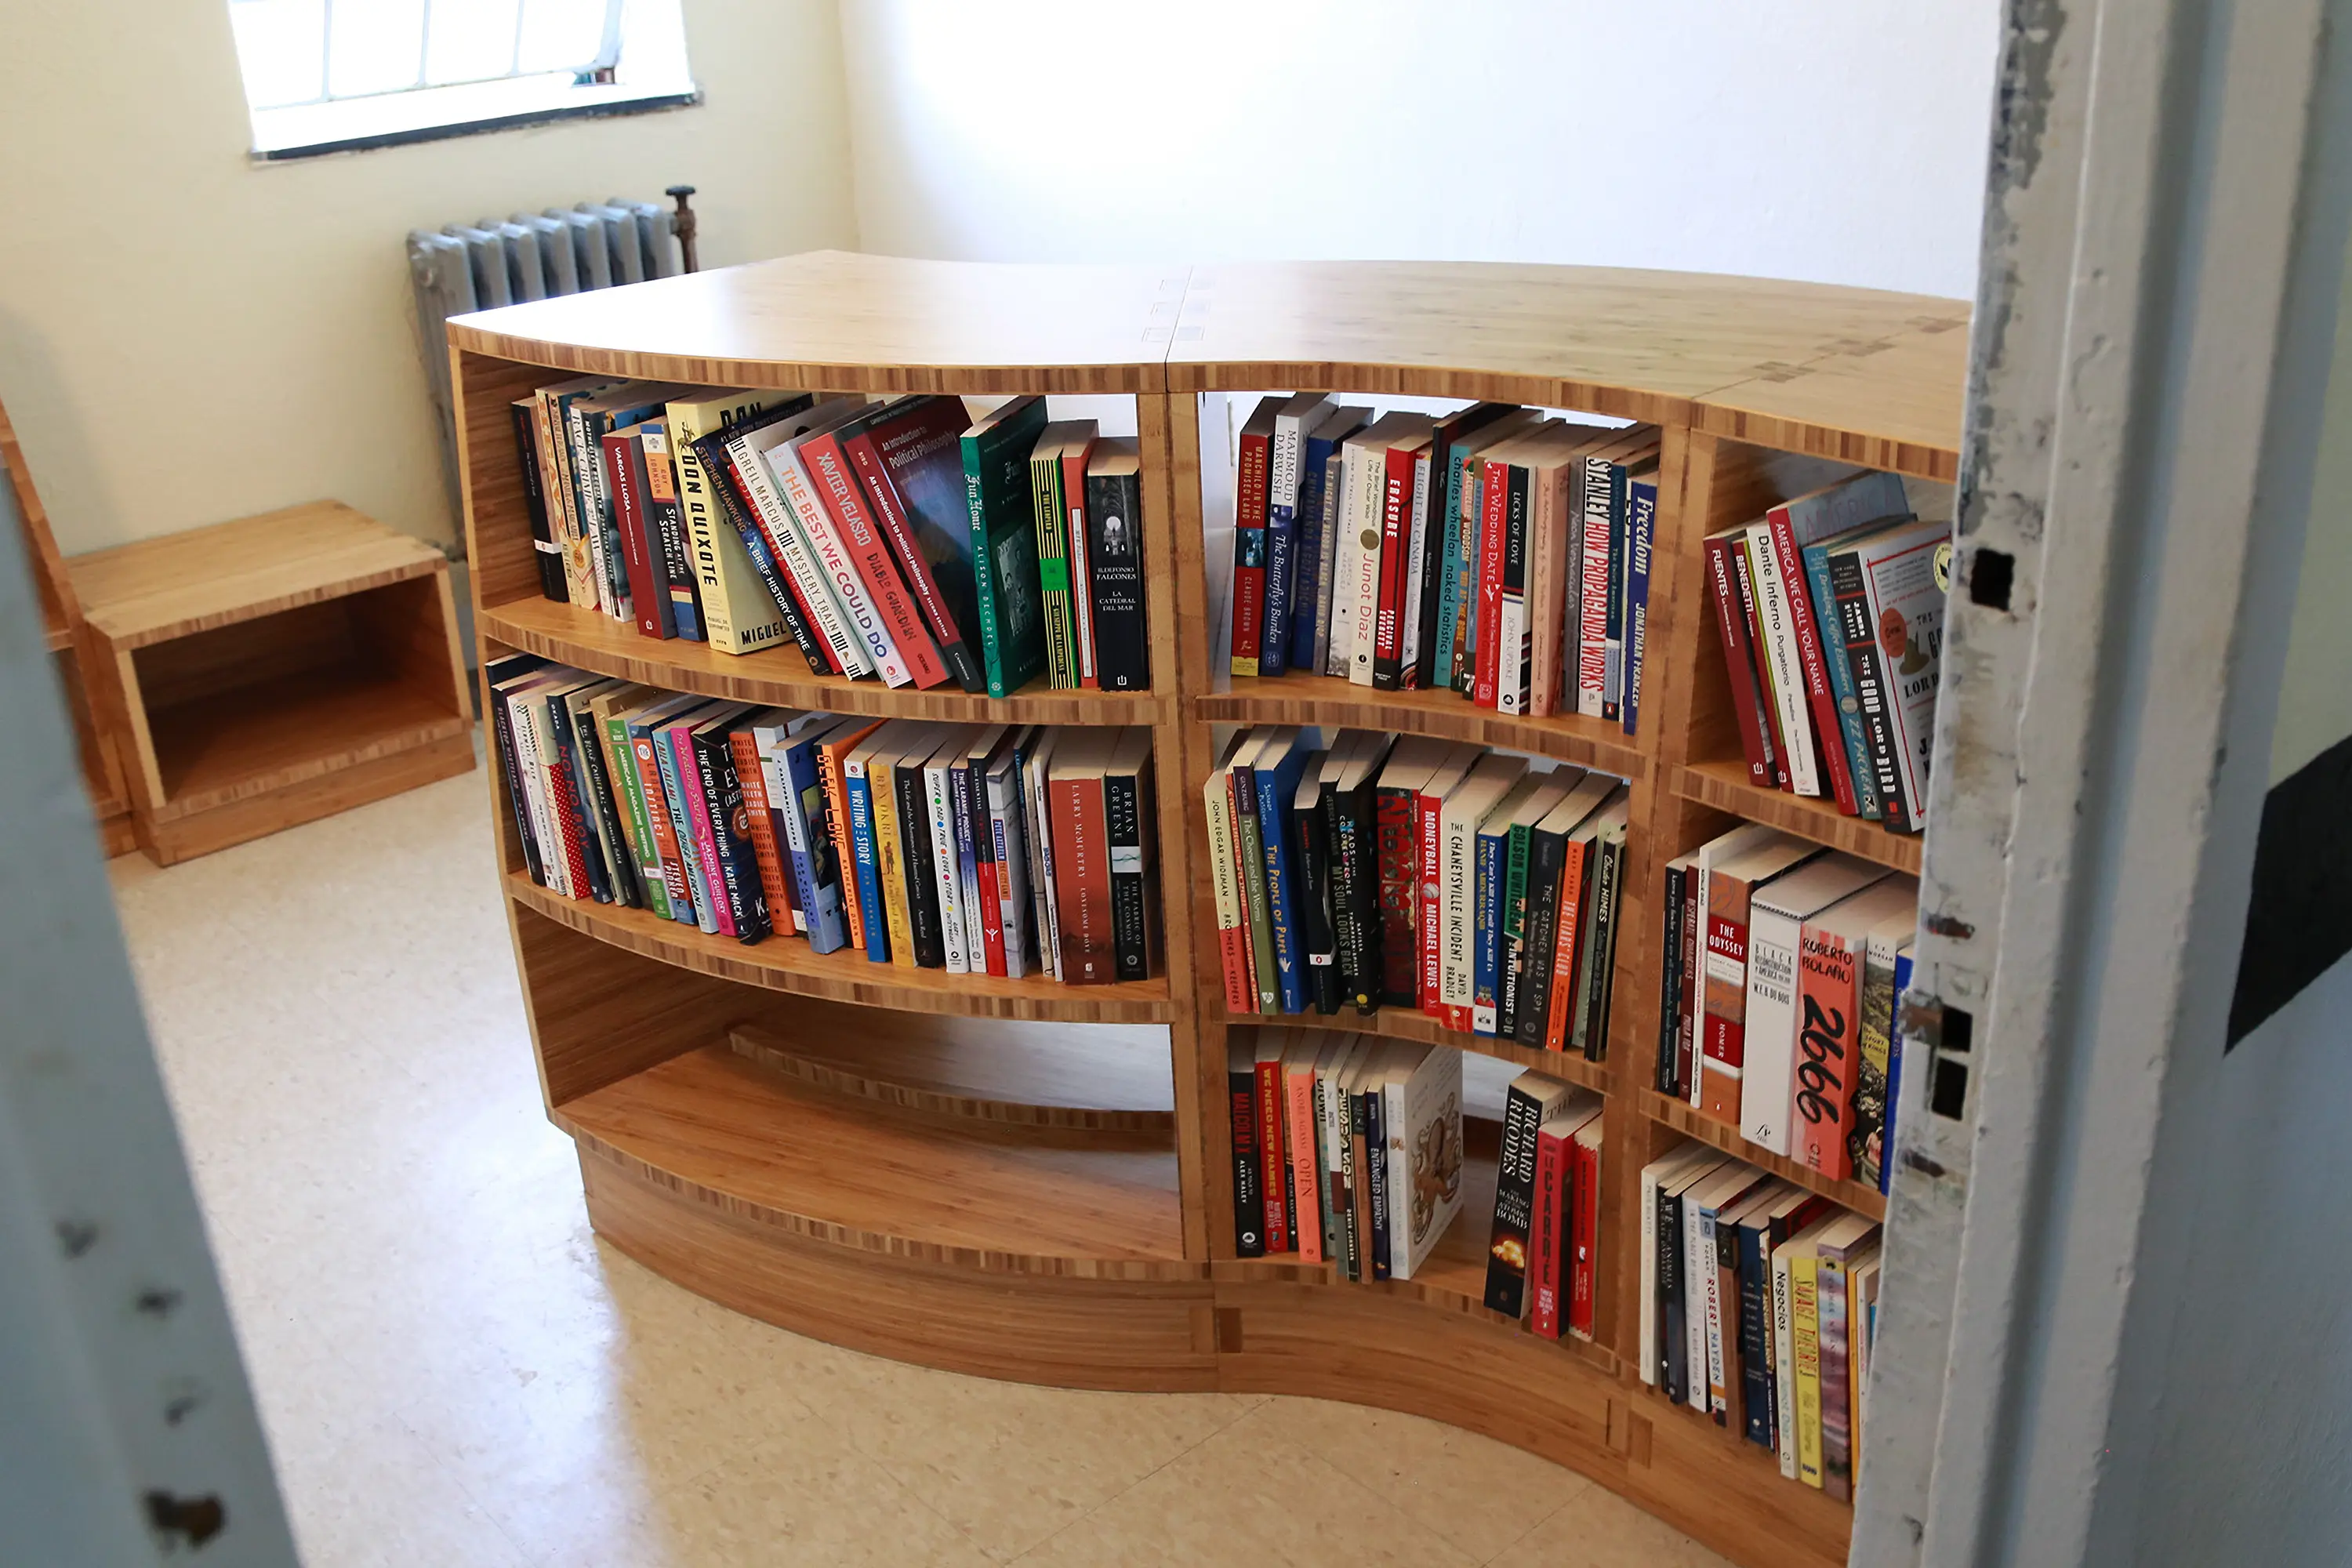 Room with a wooden Freedom Library bookcase made of three curved modules filled with books.